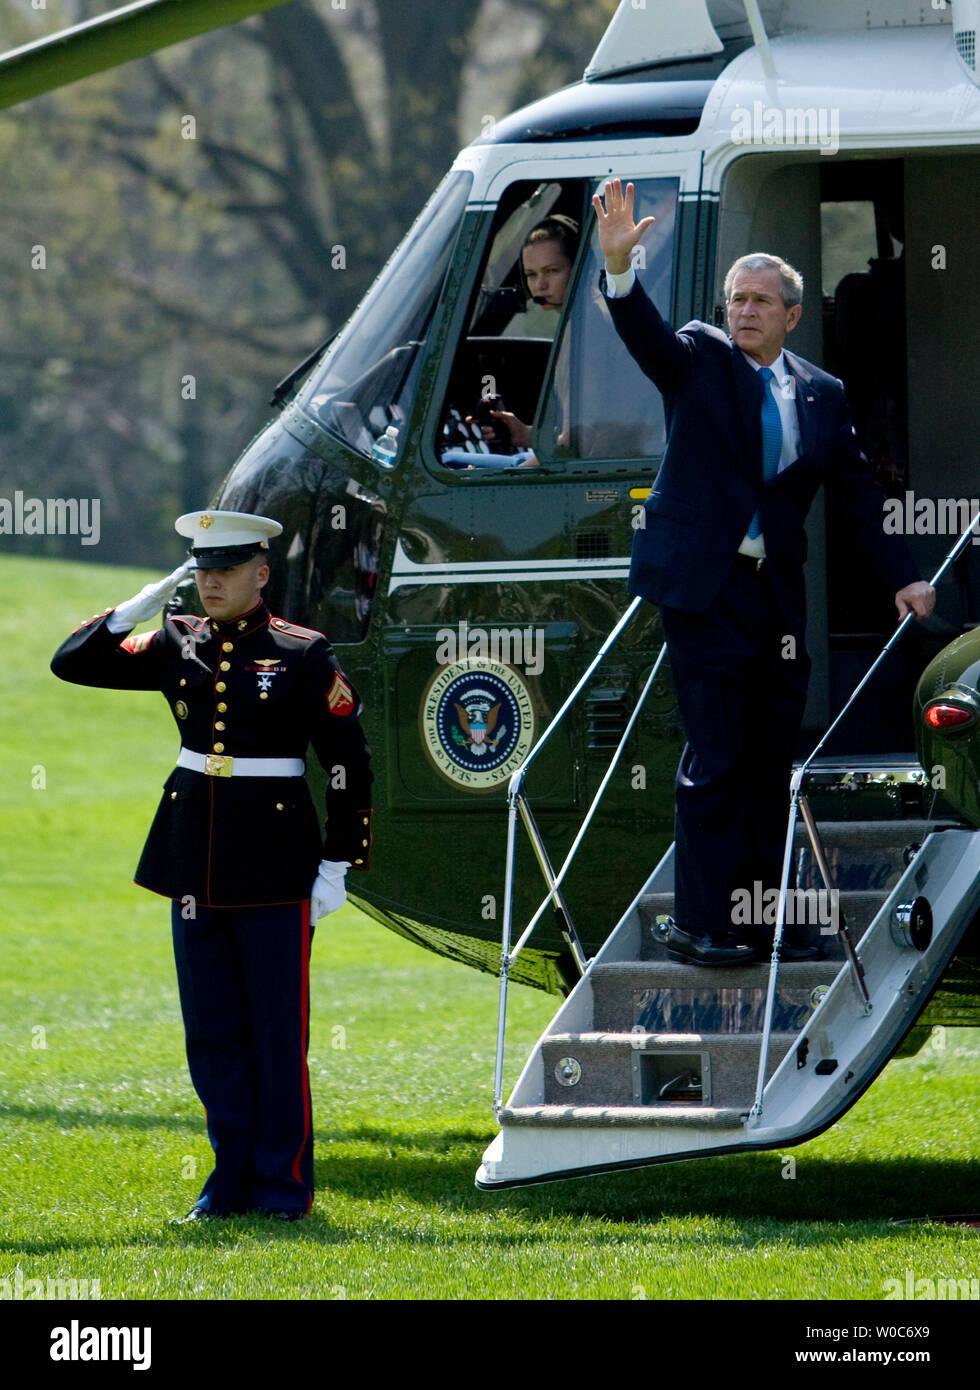 U.S. President George W. Bush departs the White House en route to his ranch in Crawford, Texas in Washington on April 10, 2008. (UPI Photo/Patrick D. McDermott) Stock Photo